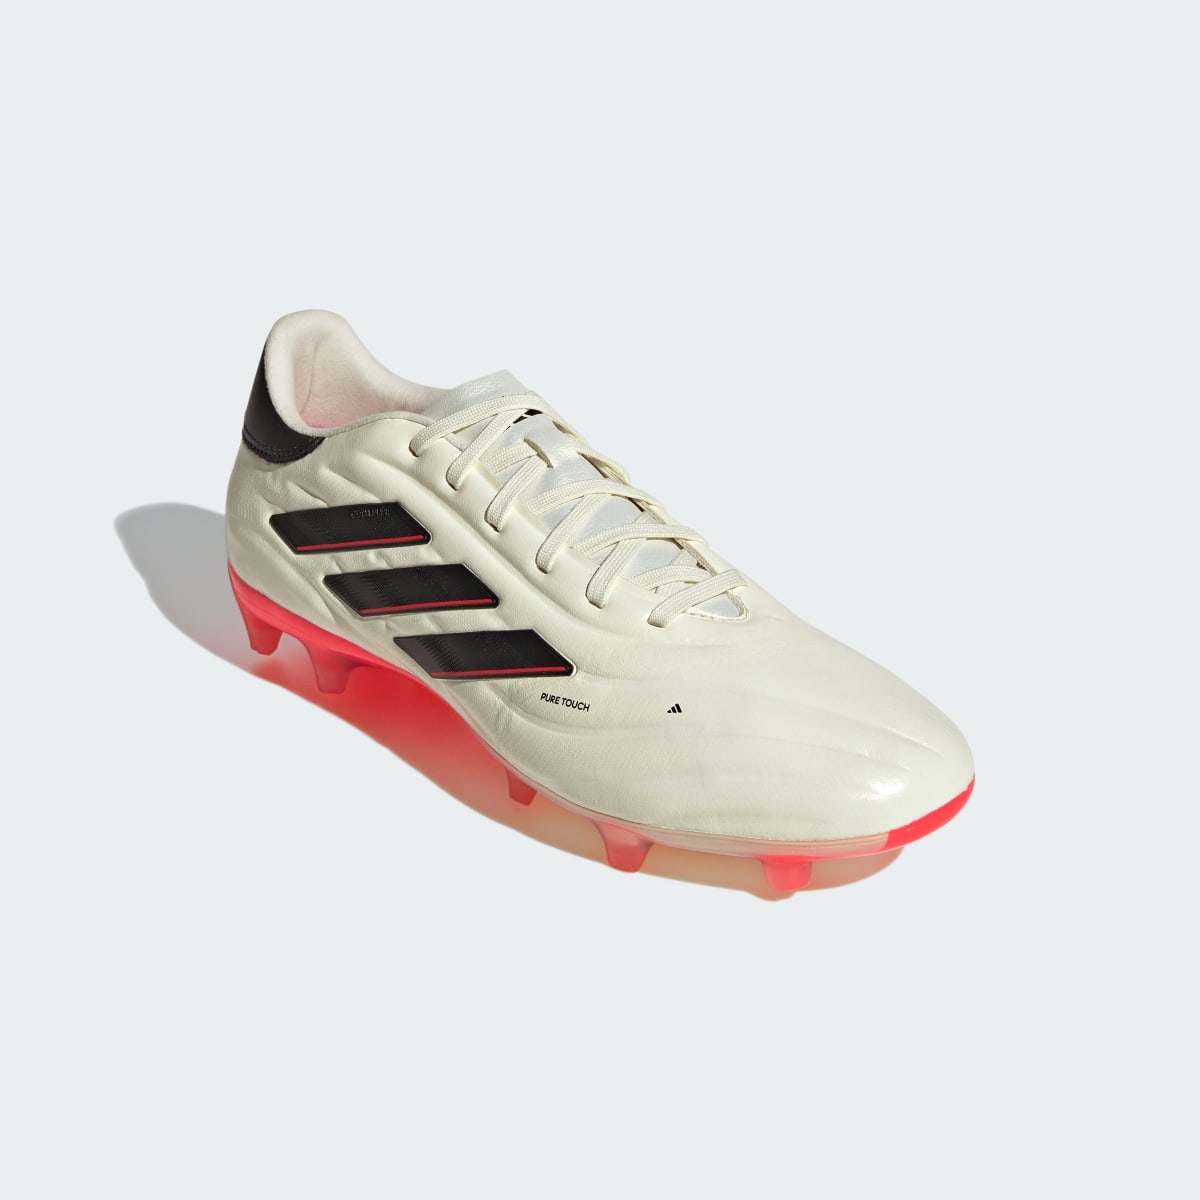 Adidas Copa Pure II Pro Firm Ground Boots. 5